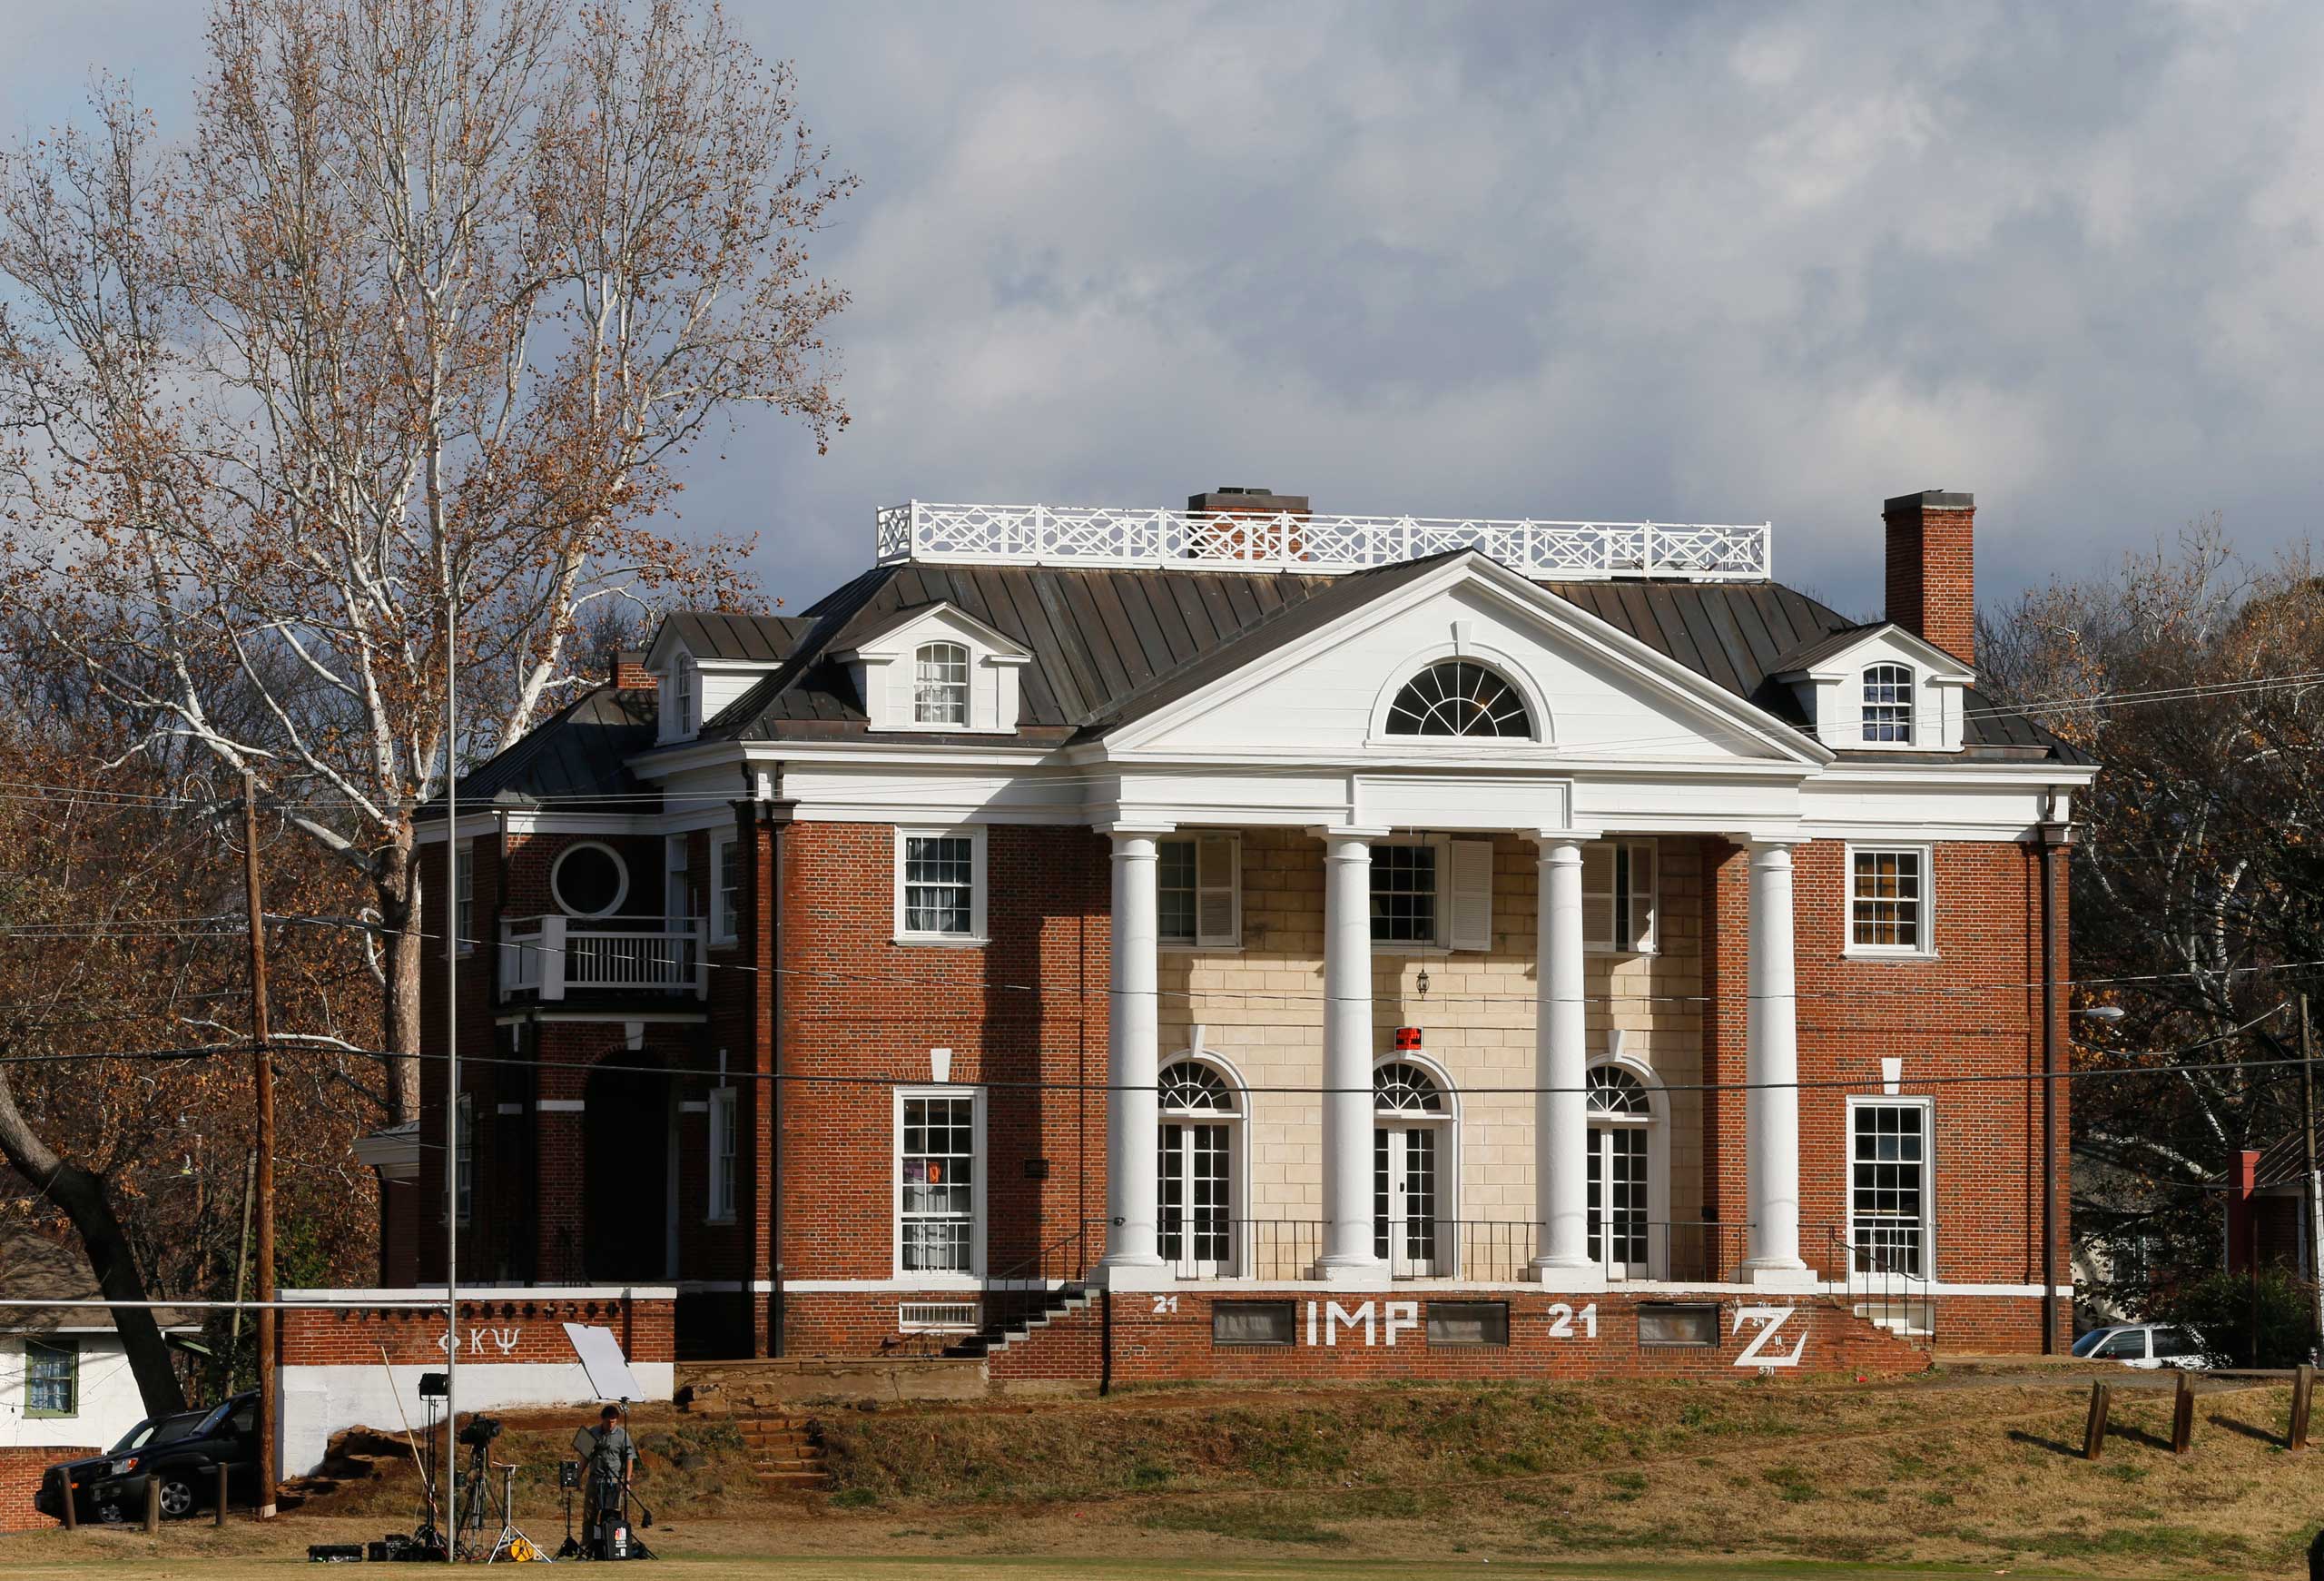 The Phi Kappa Psi fraternity house at the University of Virginia in Charlottesville, Va., on Nov. 24, 2014. A <i>Rolling Stone</i> article alleged a gang rape at the hous (Steve Helber—AP)